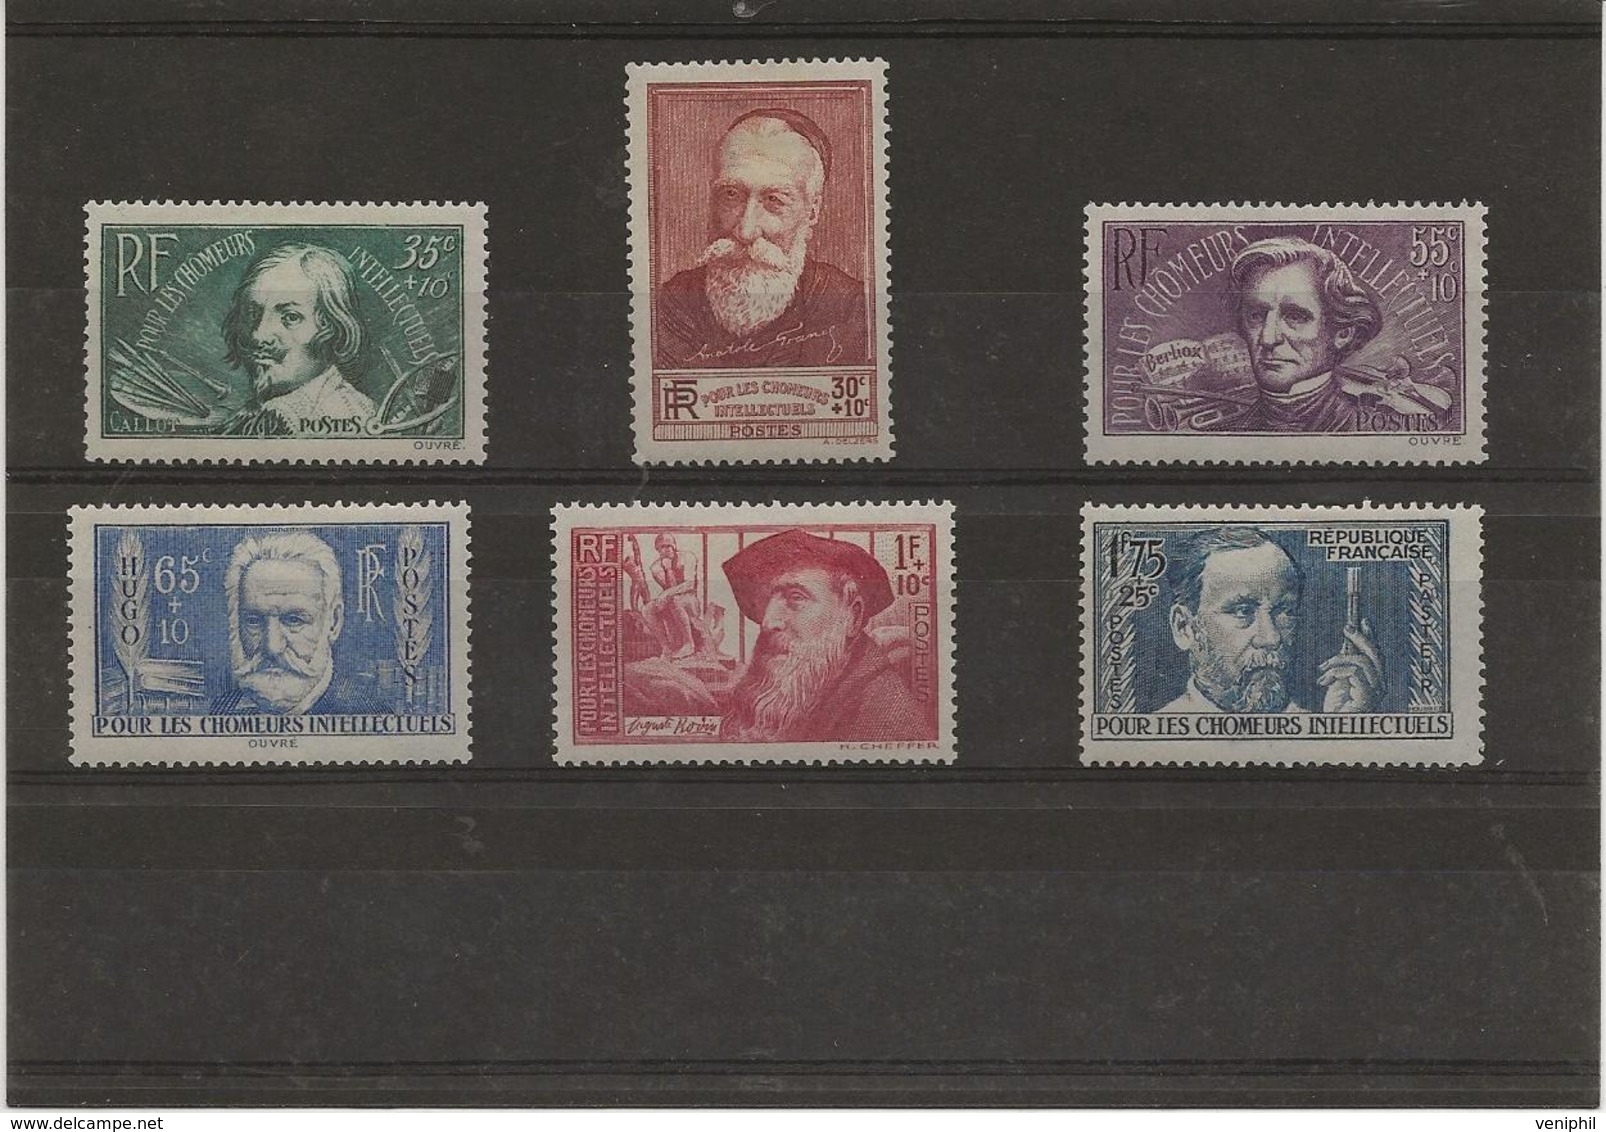 TIMBRES CHOMEURS INTELLECTUELS - N° 380 A 385 NEUF INFIME CHARNIERE - COTE : 45 € - Ungebraucht